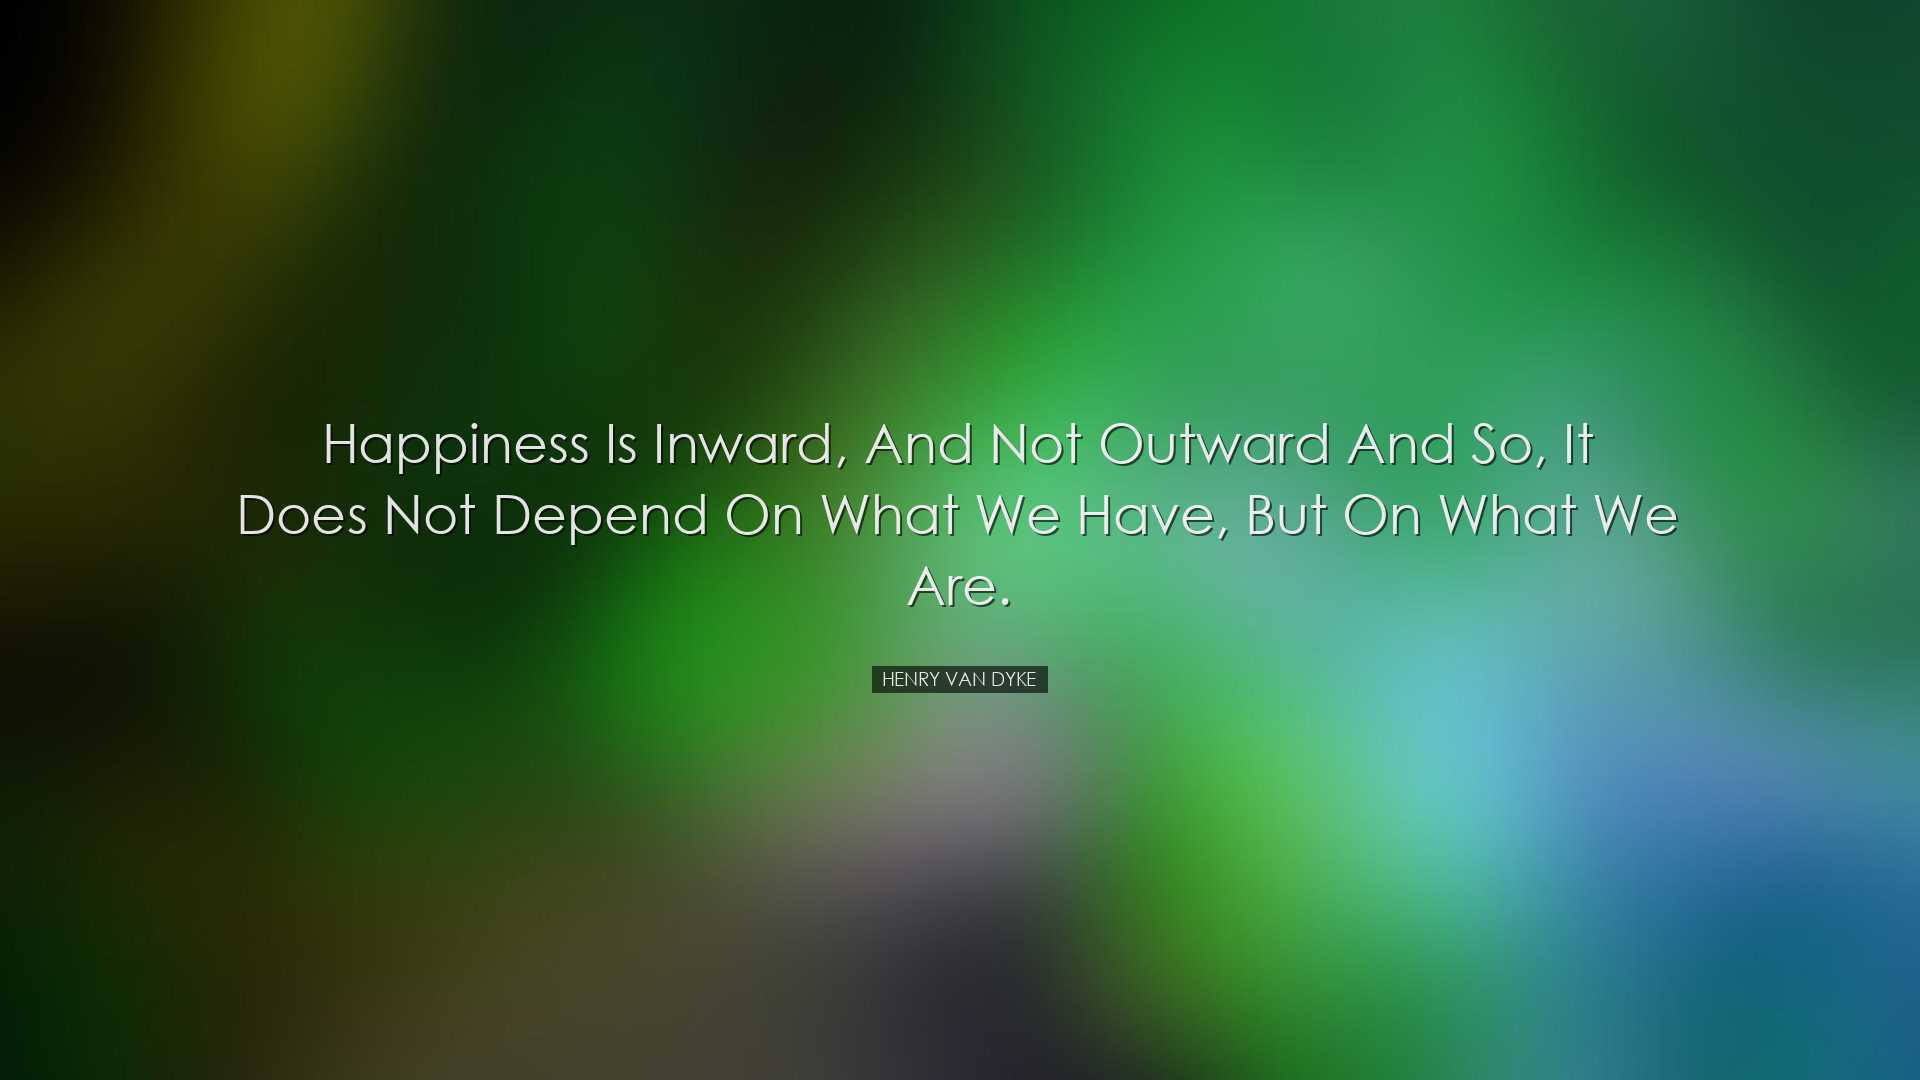 Happiness is inward, and not outward and so, it does not depend on